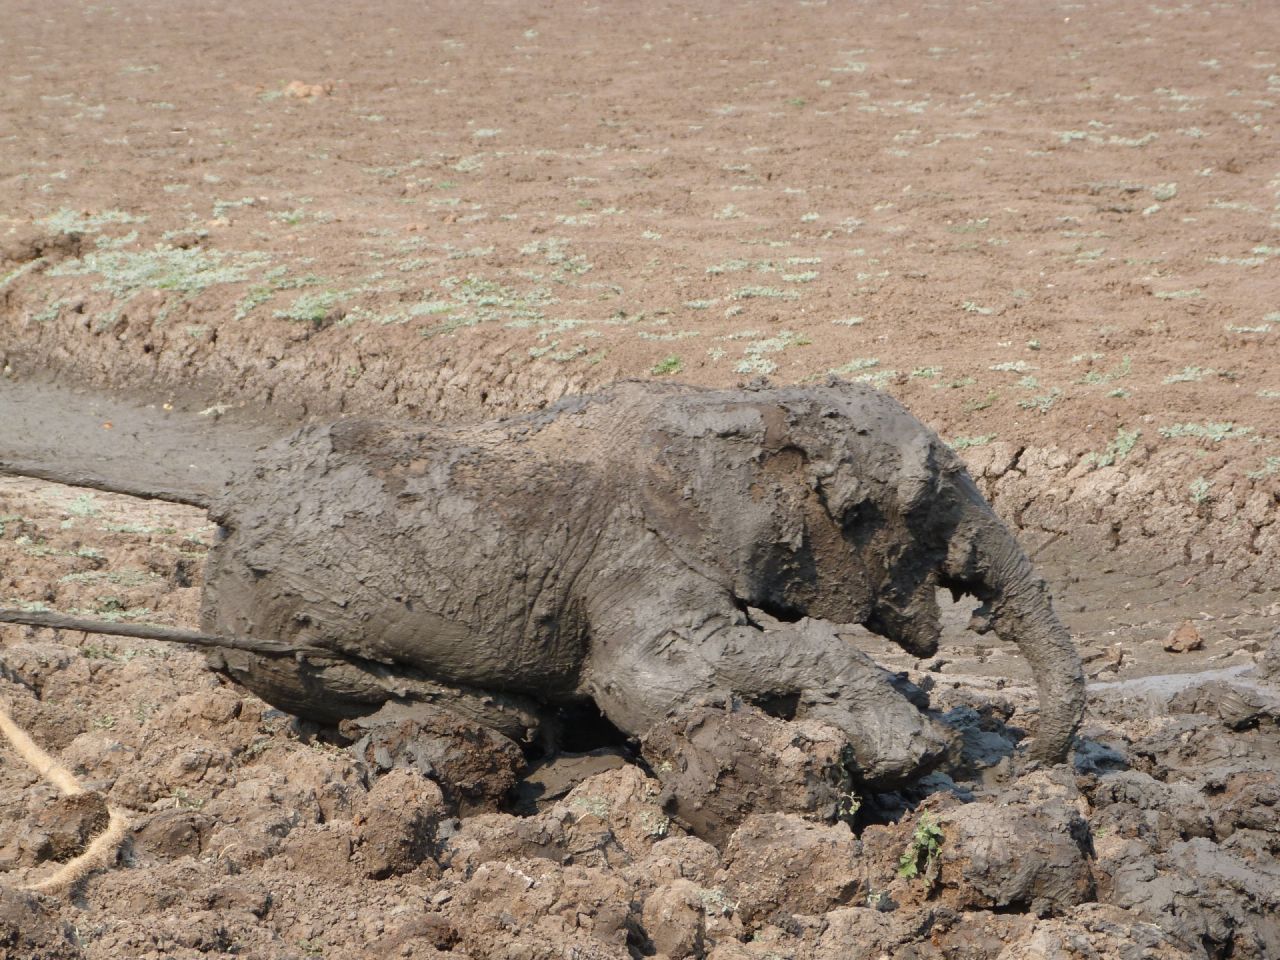 The baby elephant, although reluctant to leave its mother, was eventually pulled out.